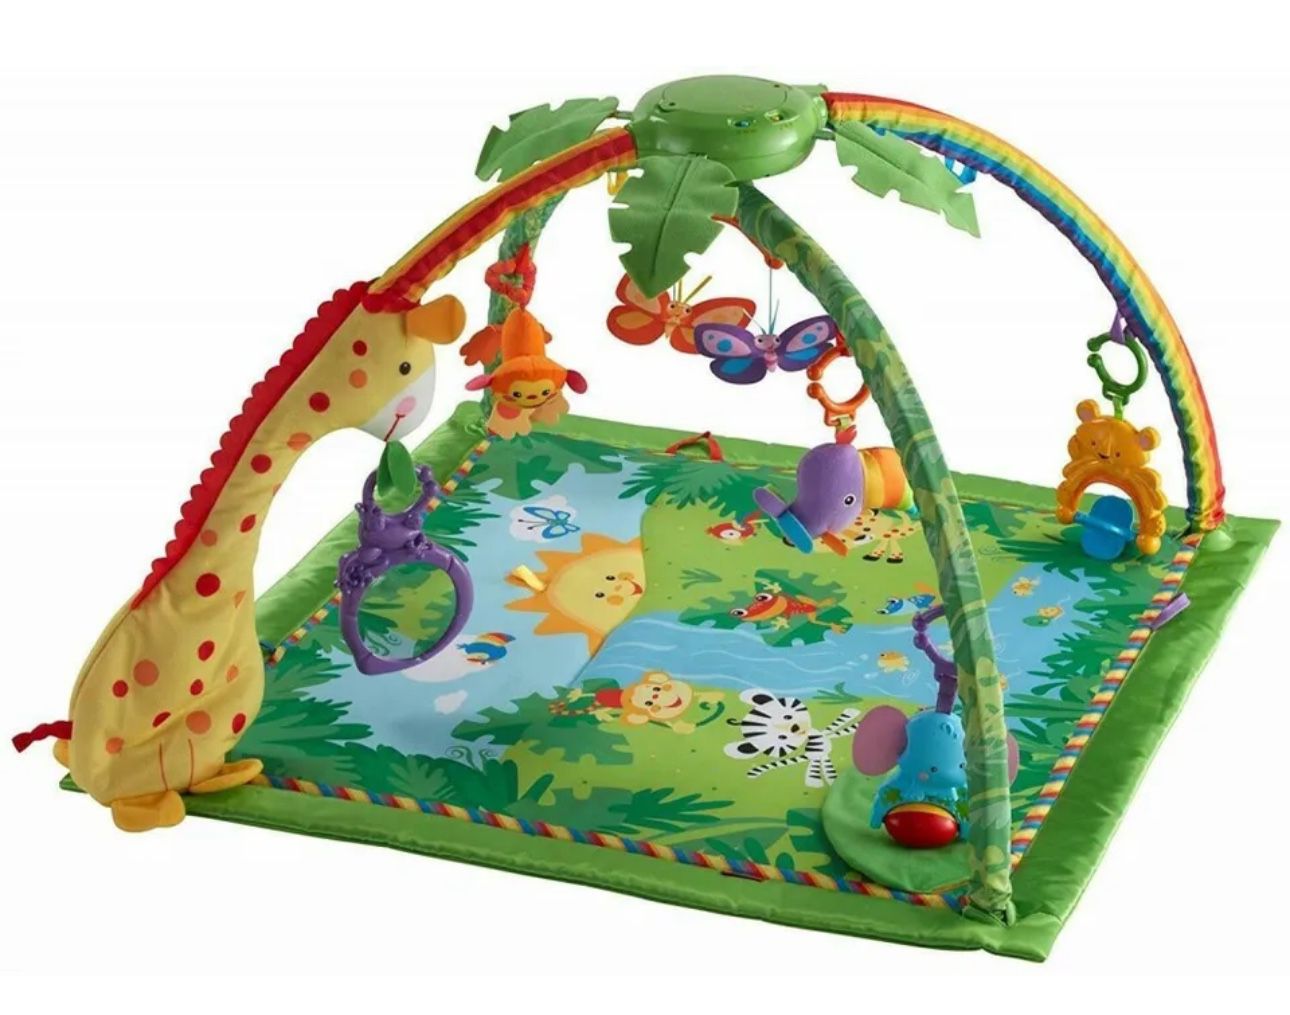 Fisher Price rainforest, magic and light deluxe play mats/Jim